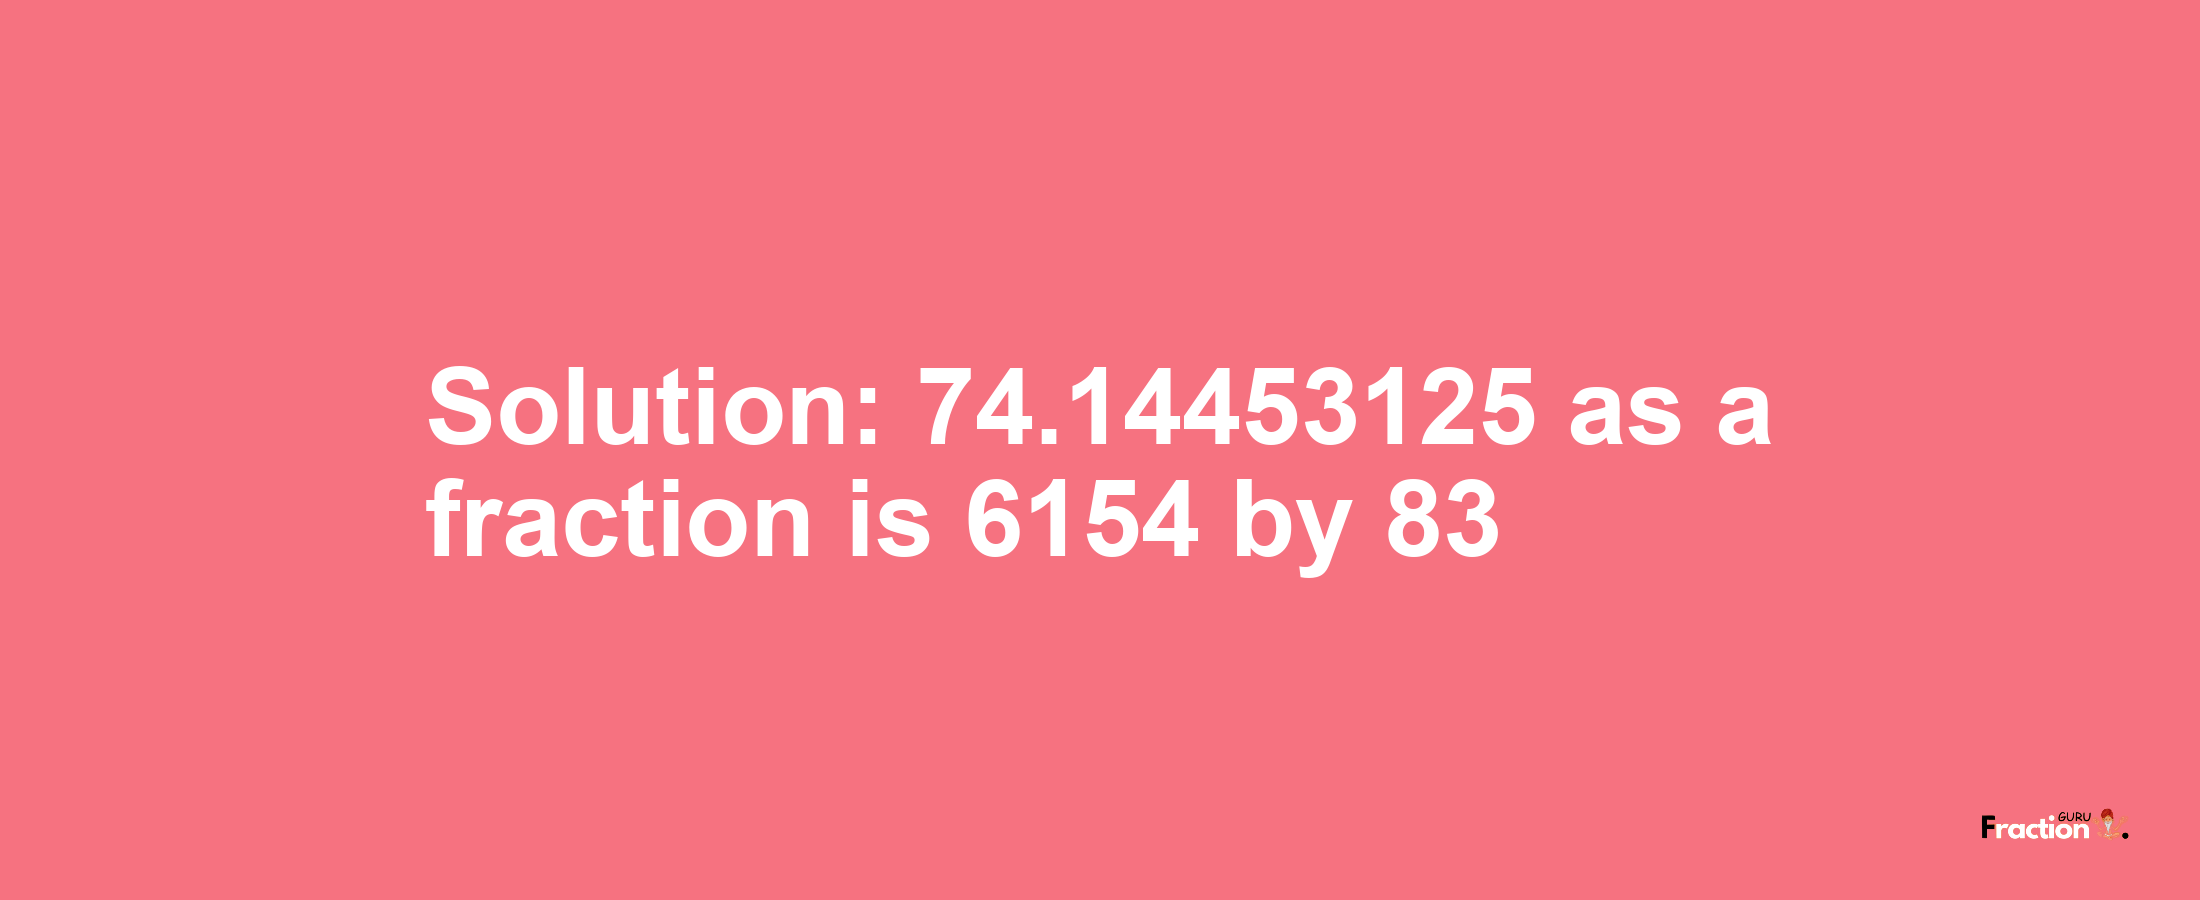 Solution:74.14453125 as a fraction is 6154/83